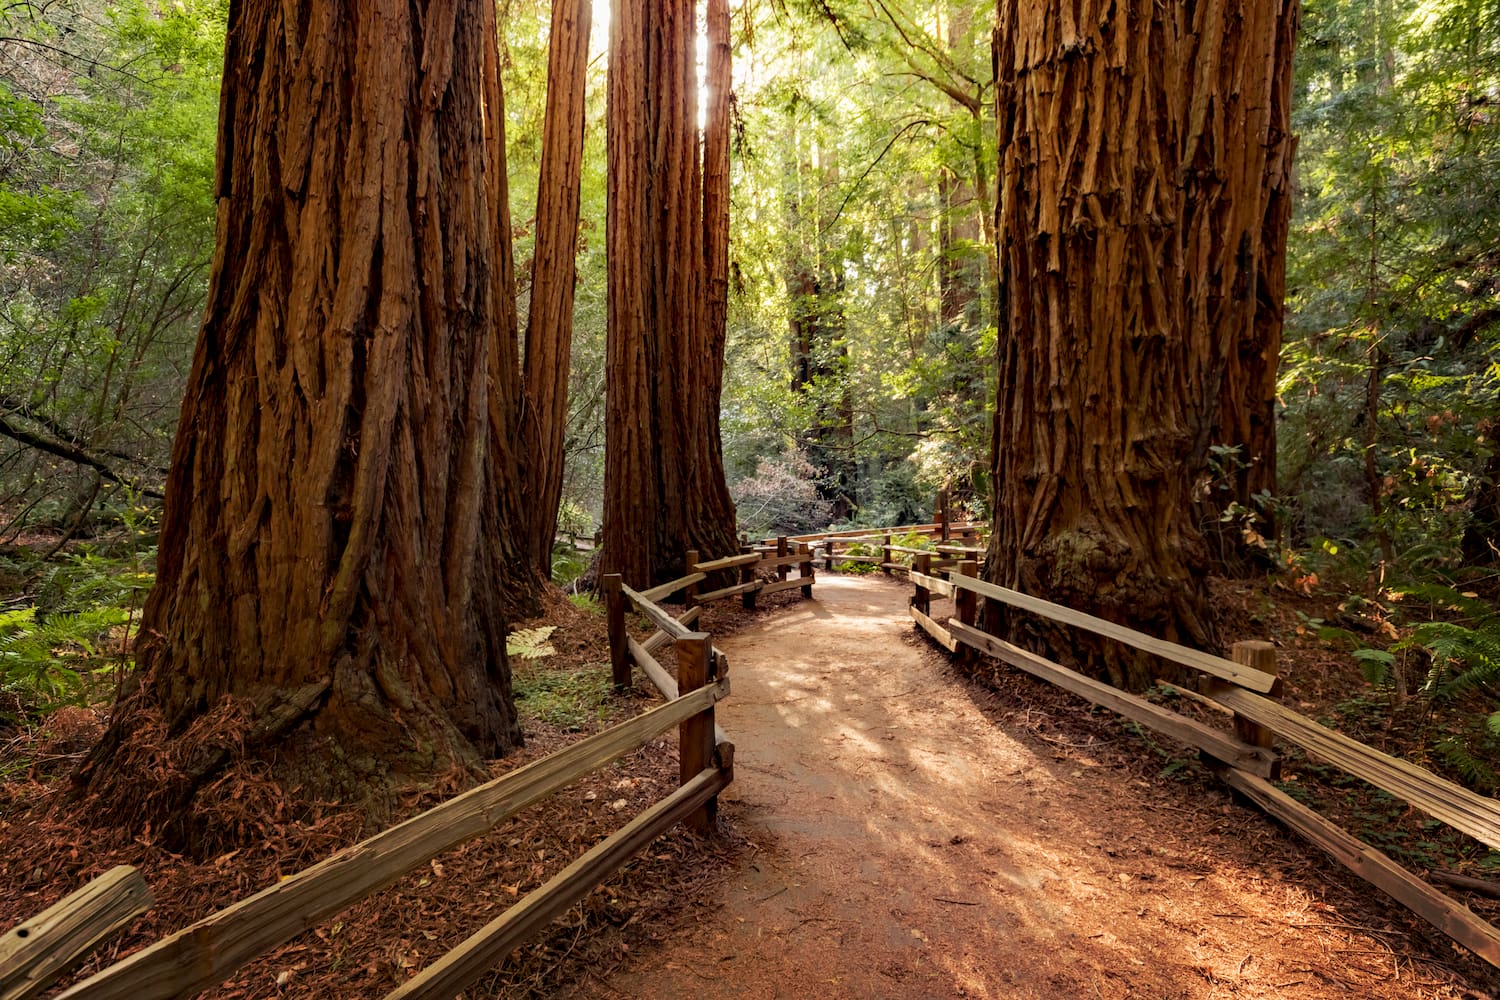 Can You Match These Natural Wonders to Their Locations? Giant Sequoia National Monument